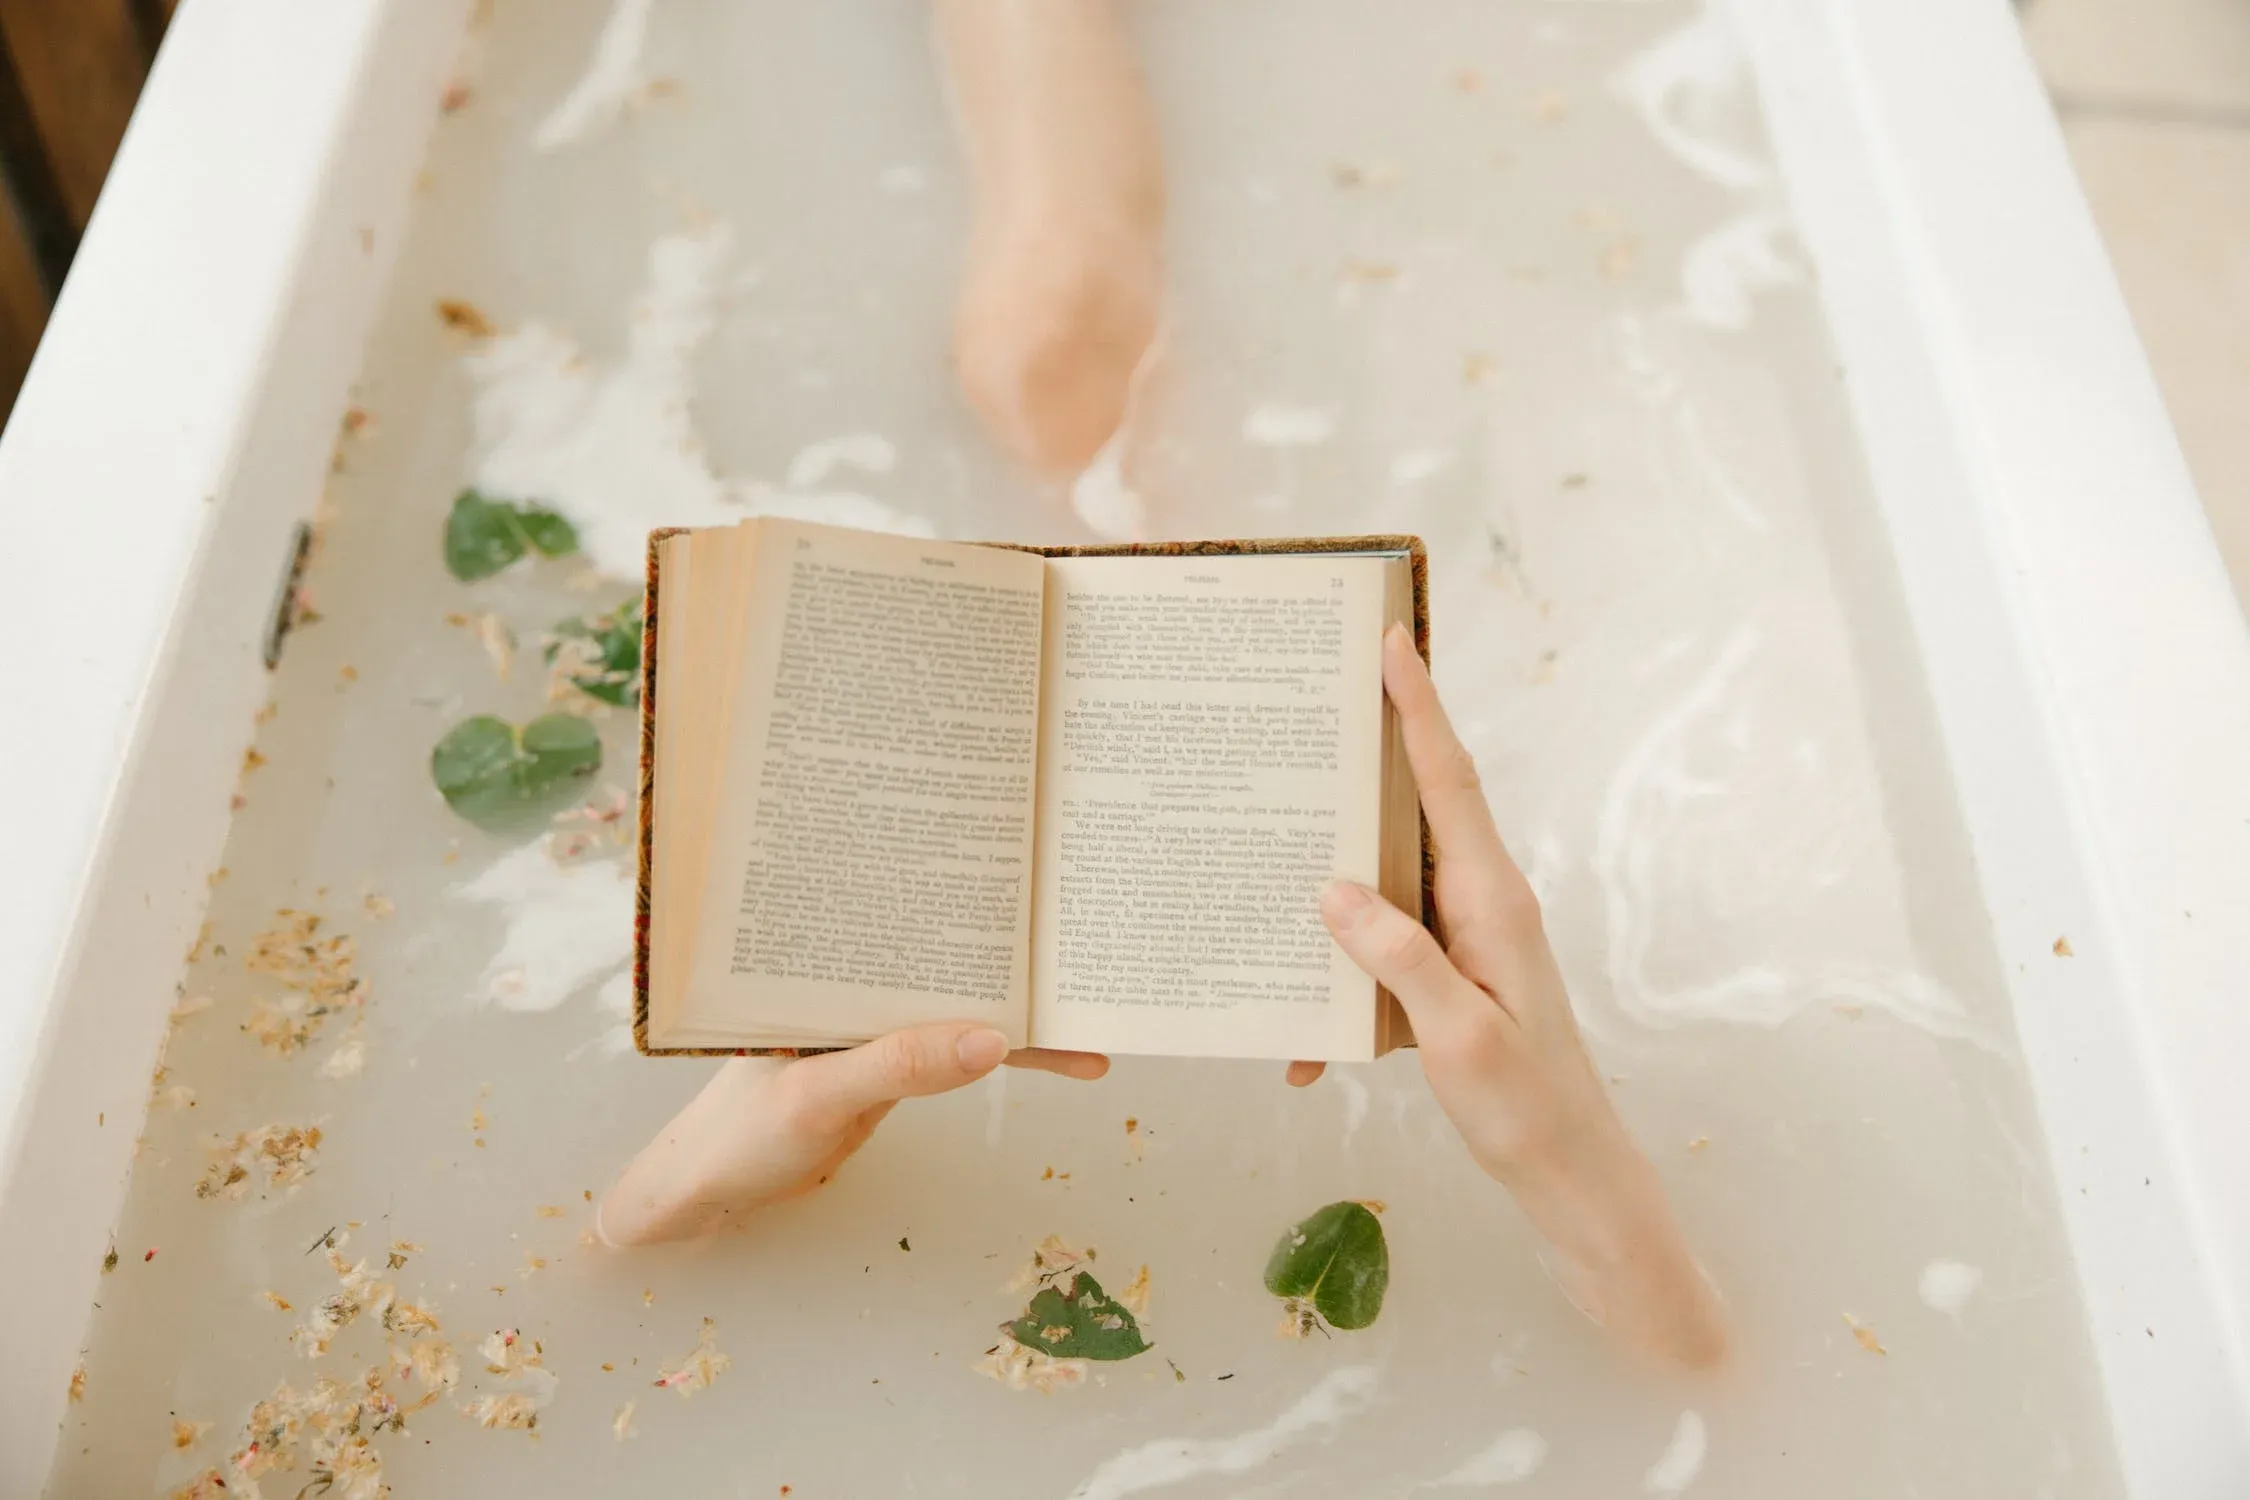 Accessories of reading while bathing